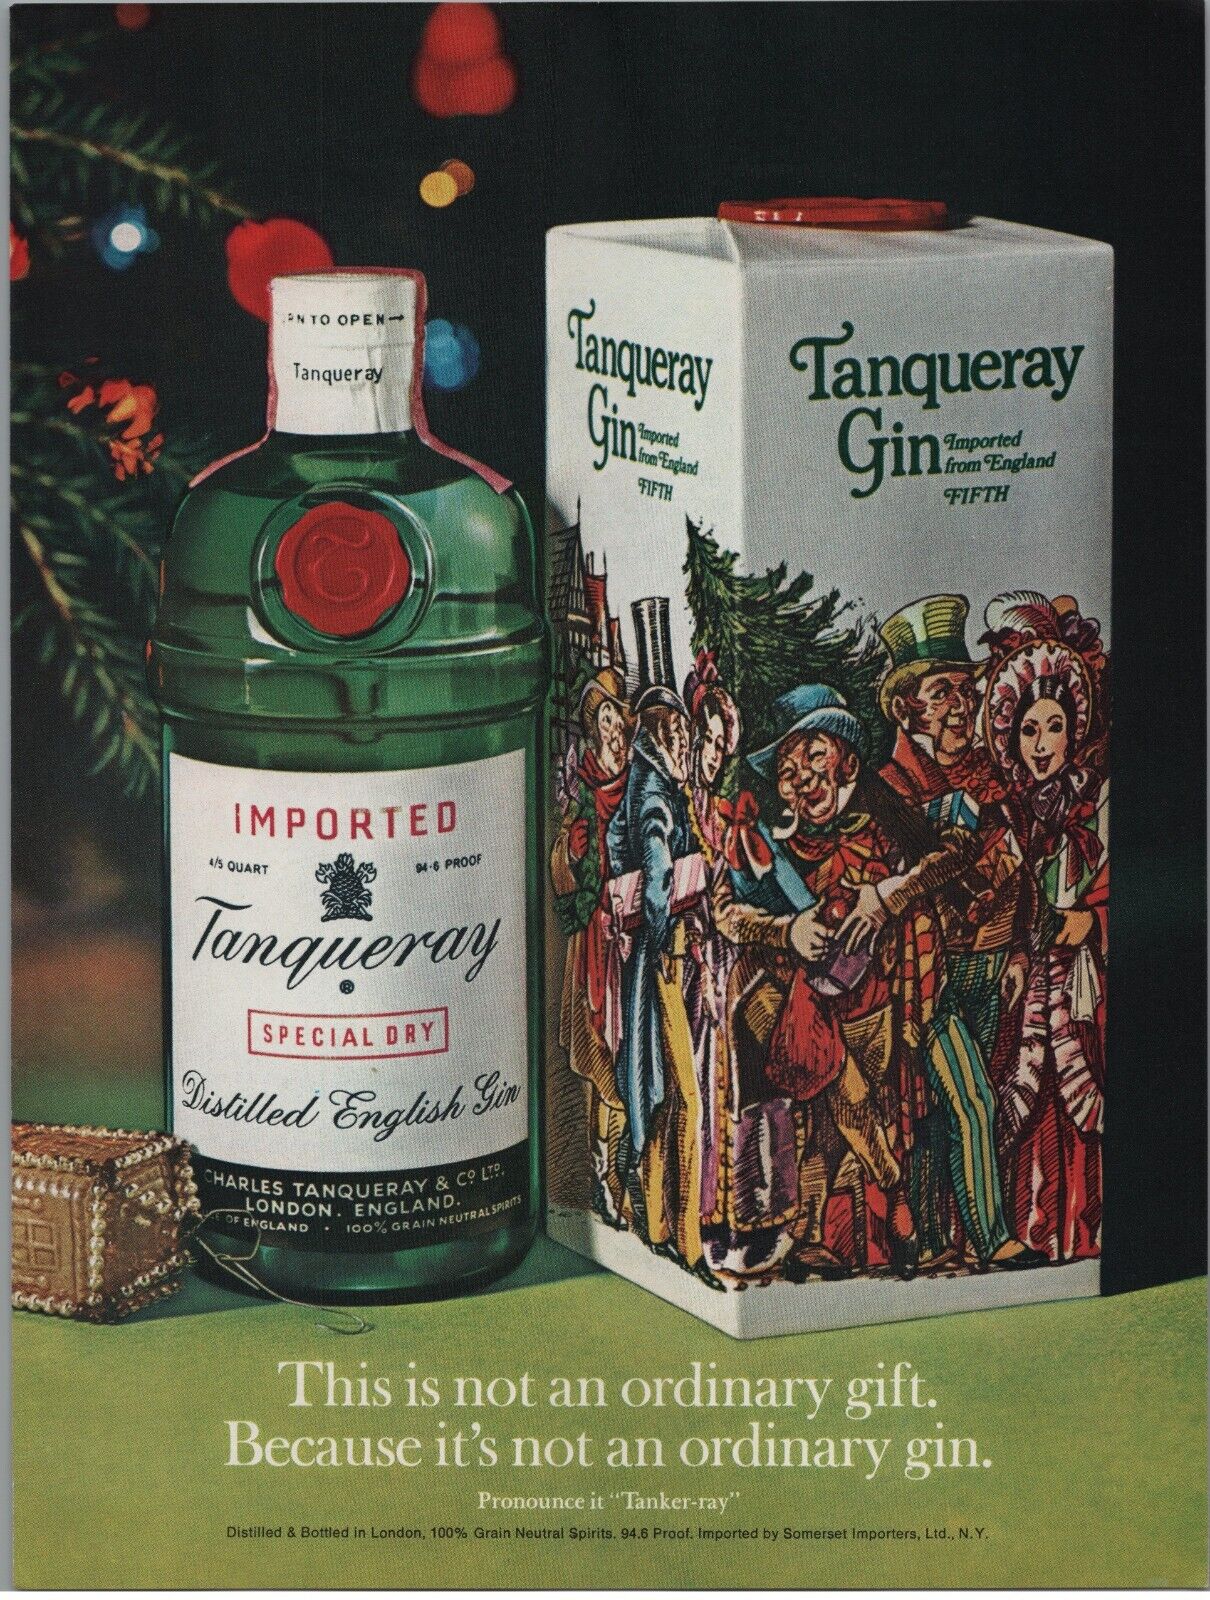 1972 Tanqueray Distilled English Gin Imported Special Dry Vintage Print Ad